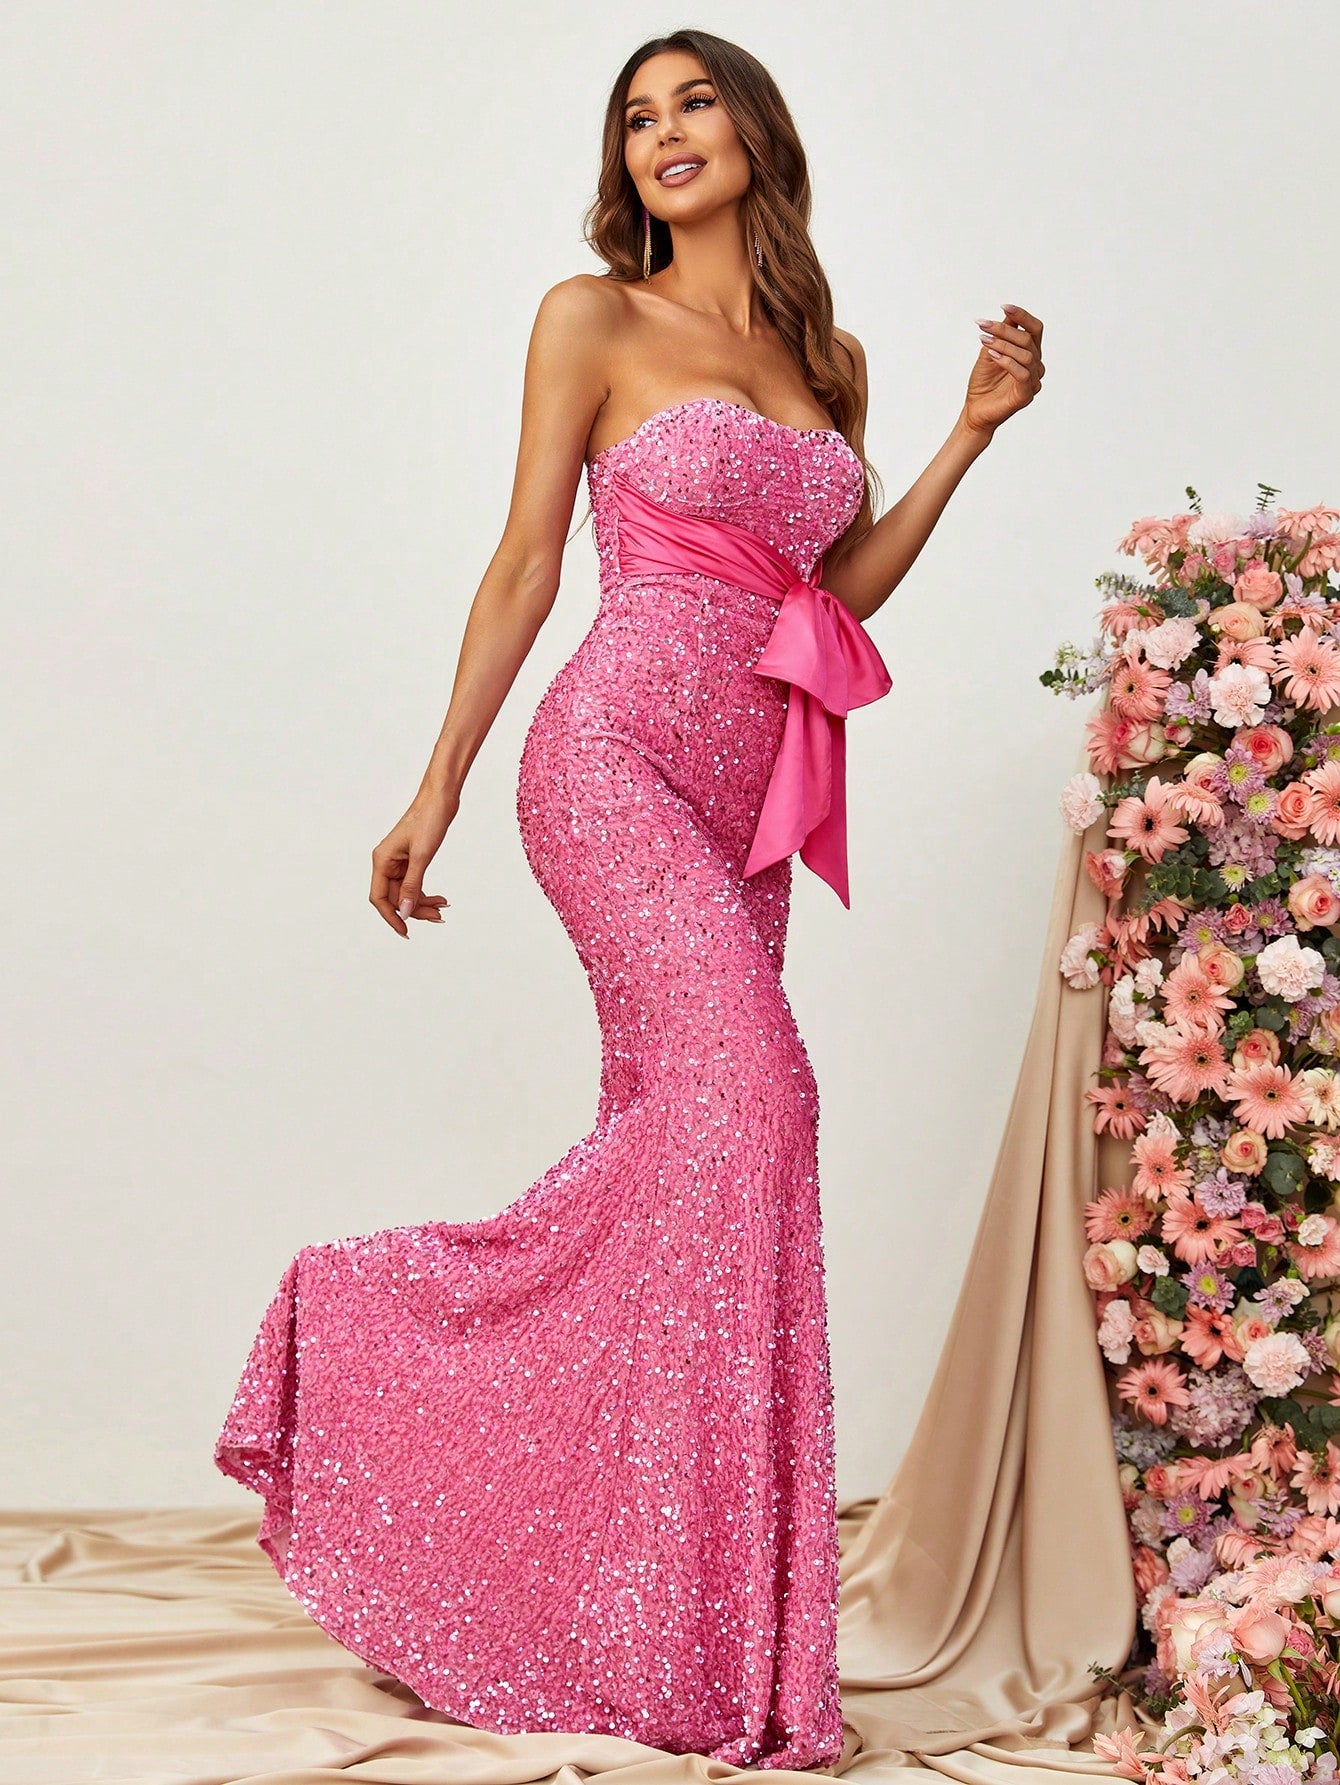 Bow Front Sequin Tube Mermaid Dresses